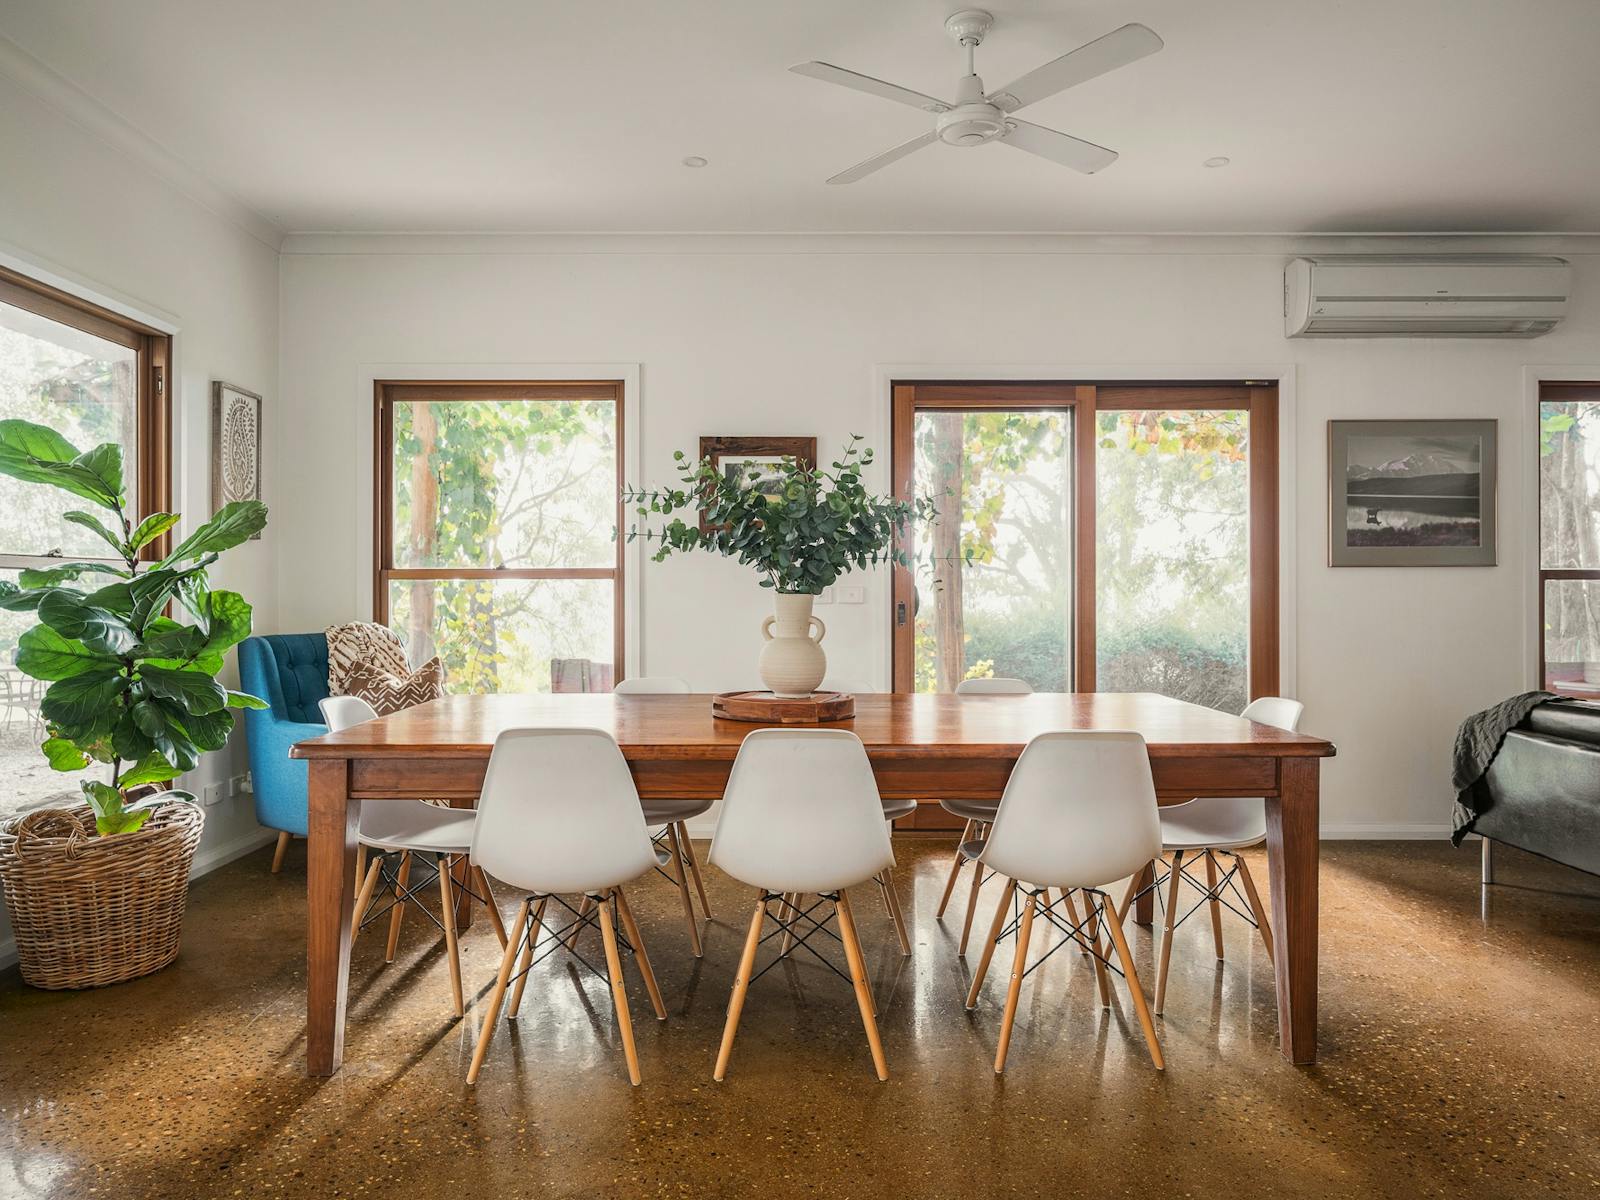 Dining Area with six seat table